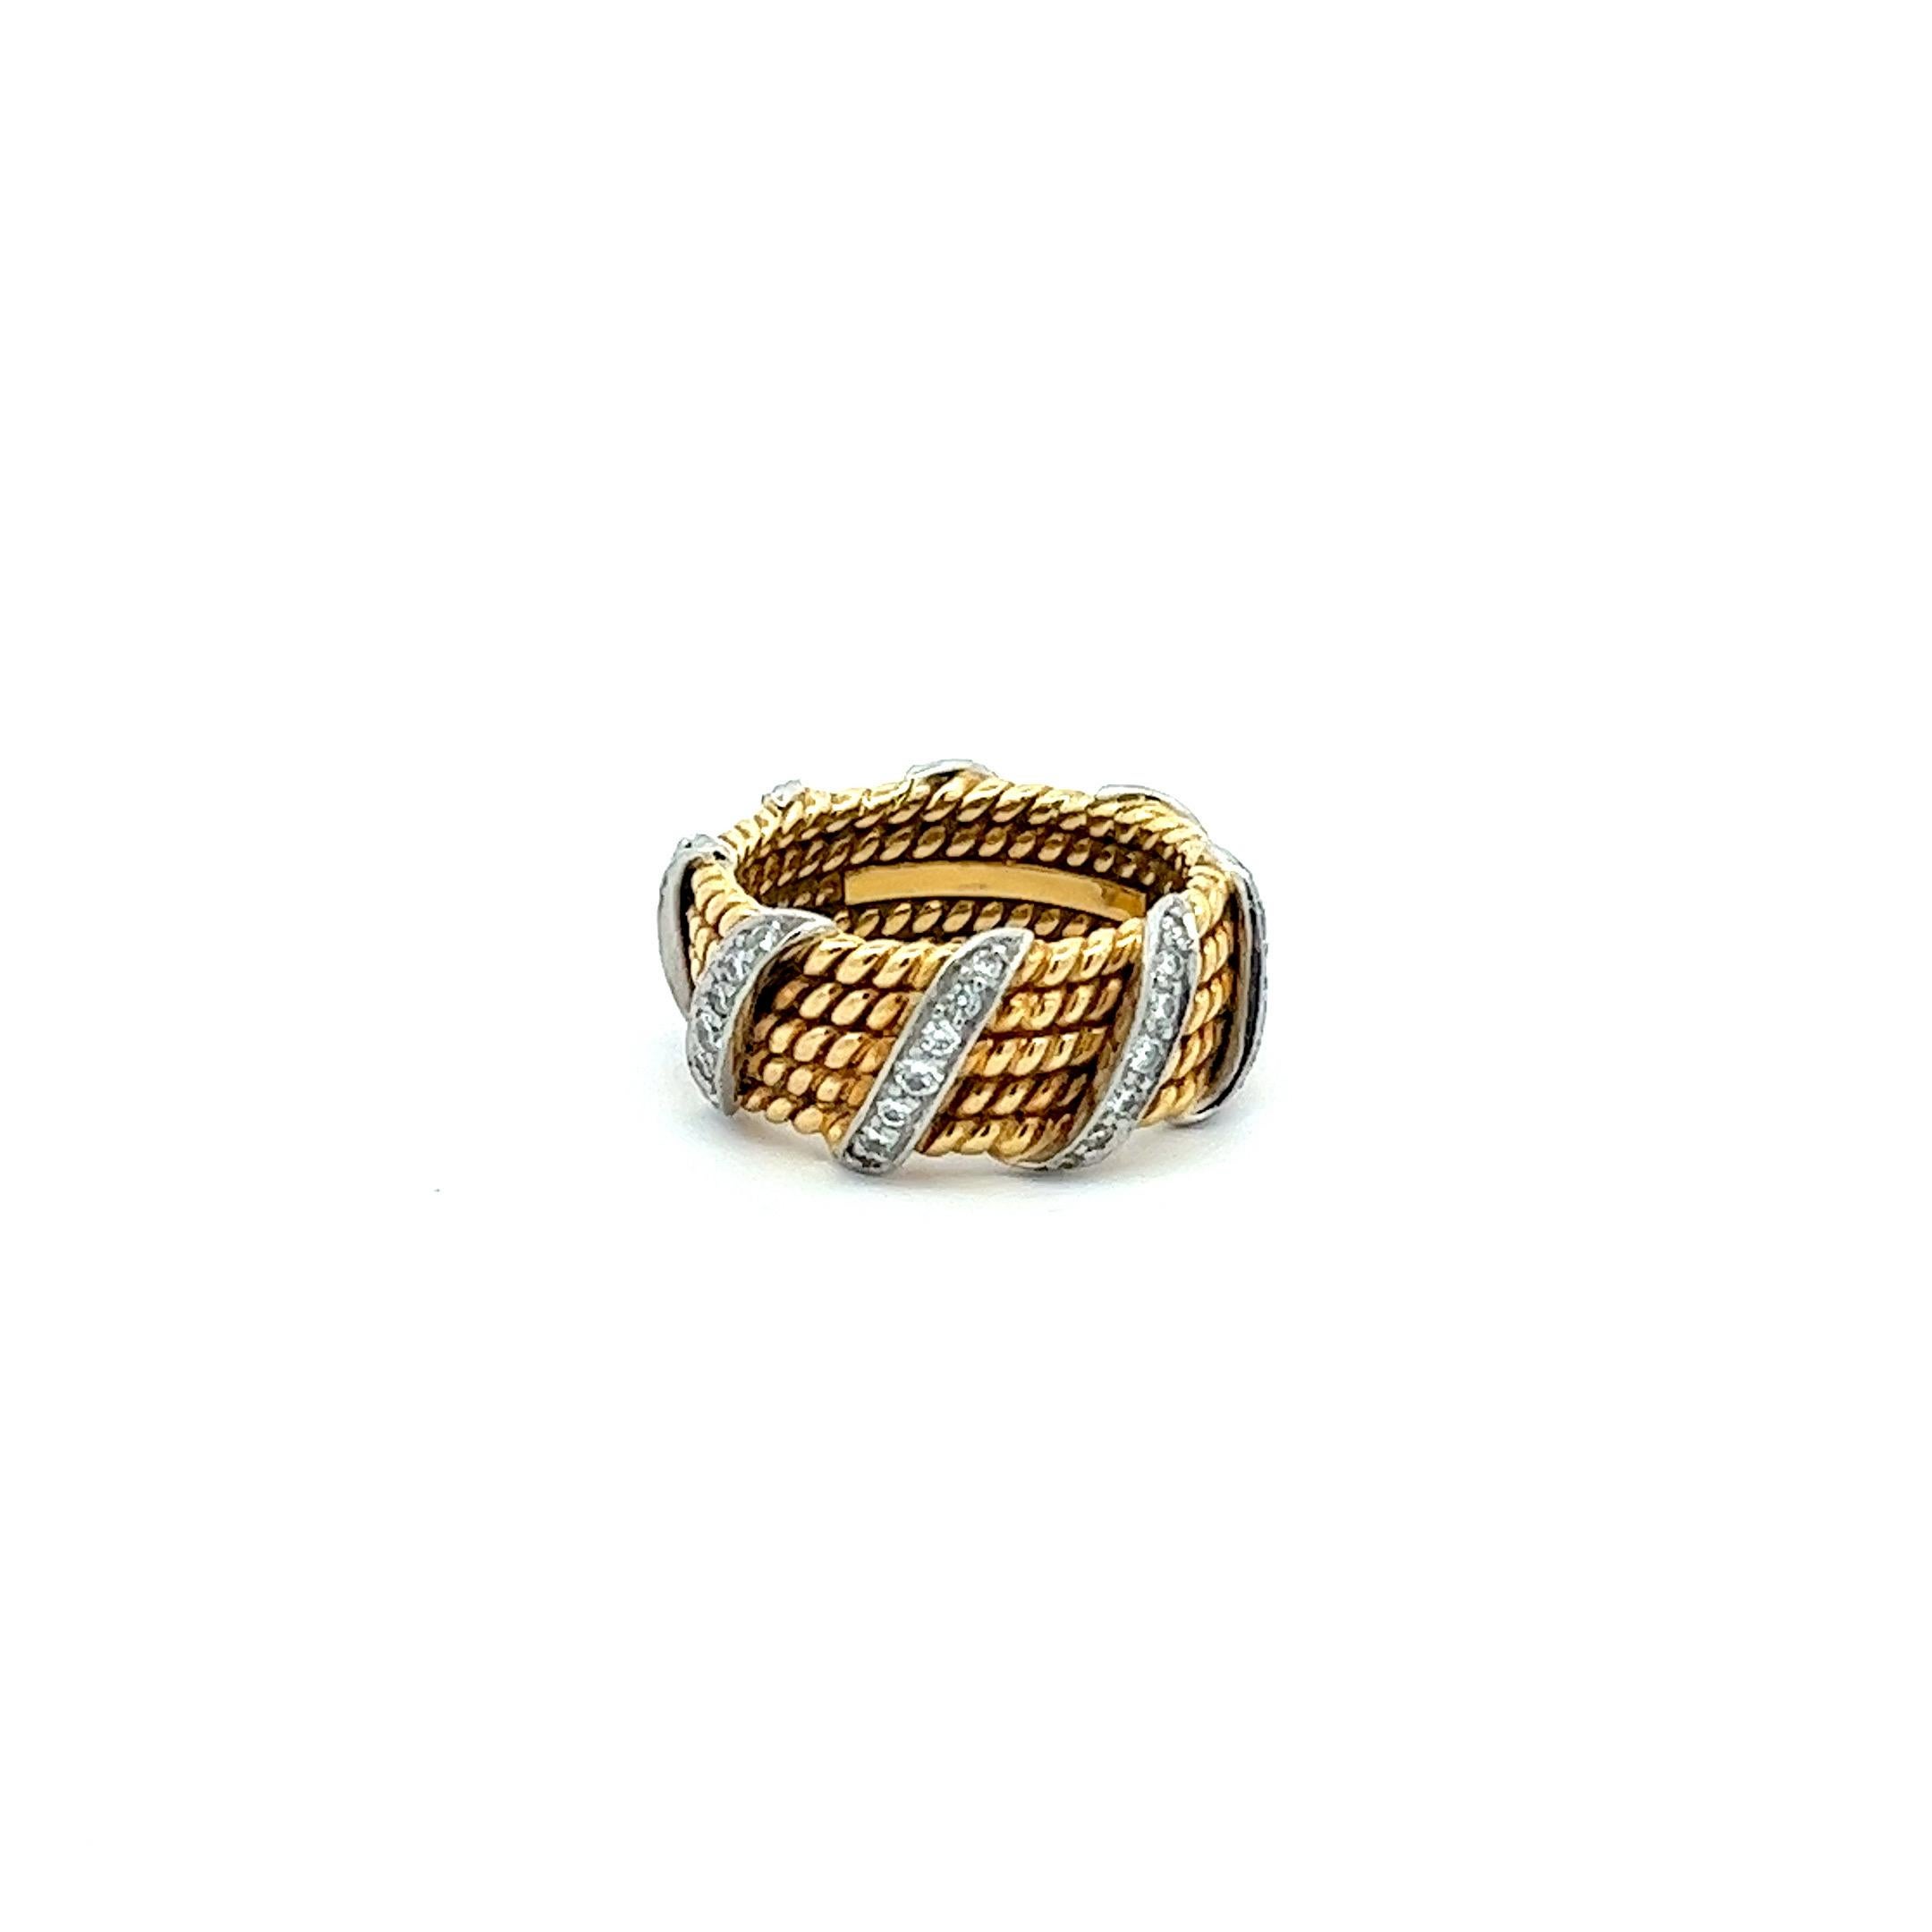 Modernist Tiffany & Co. Schlumberger 18k Gold, Platinum 5-Row Rope Band Ring with Diamonds